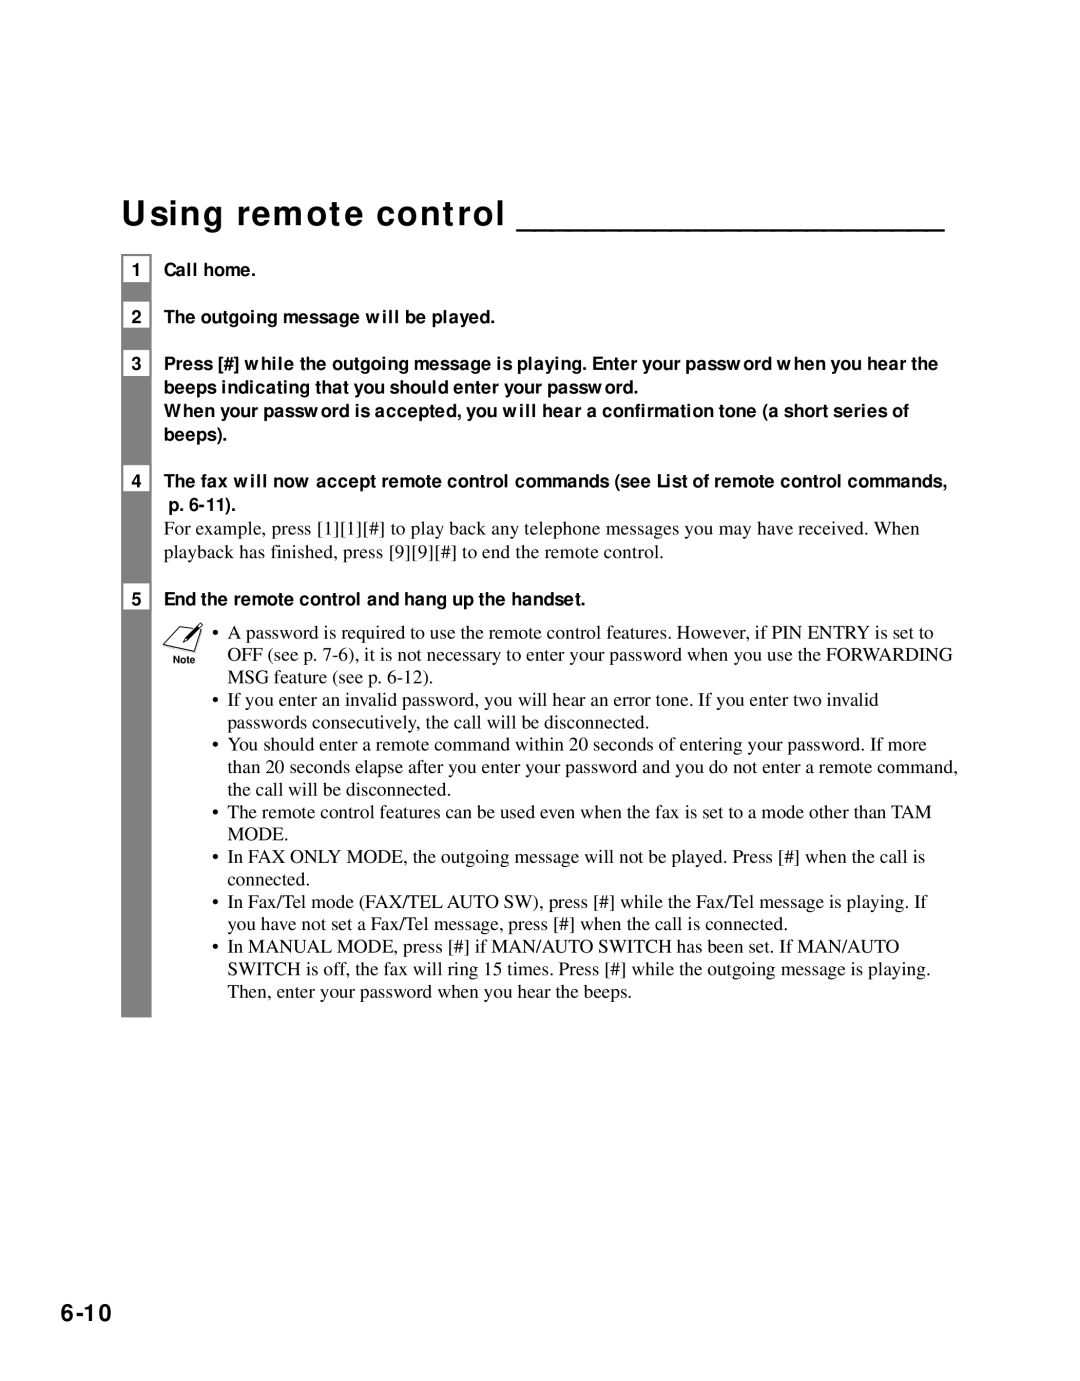 Canon B45 manual Using remote control, End the remote control and hang up the handset 